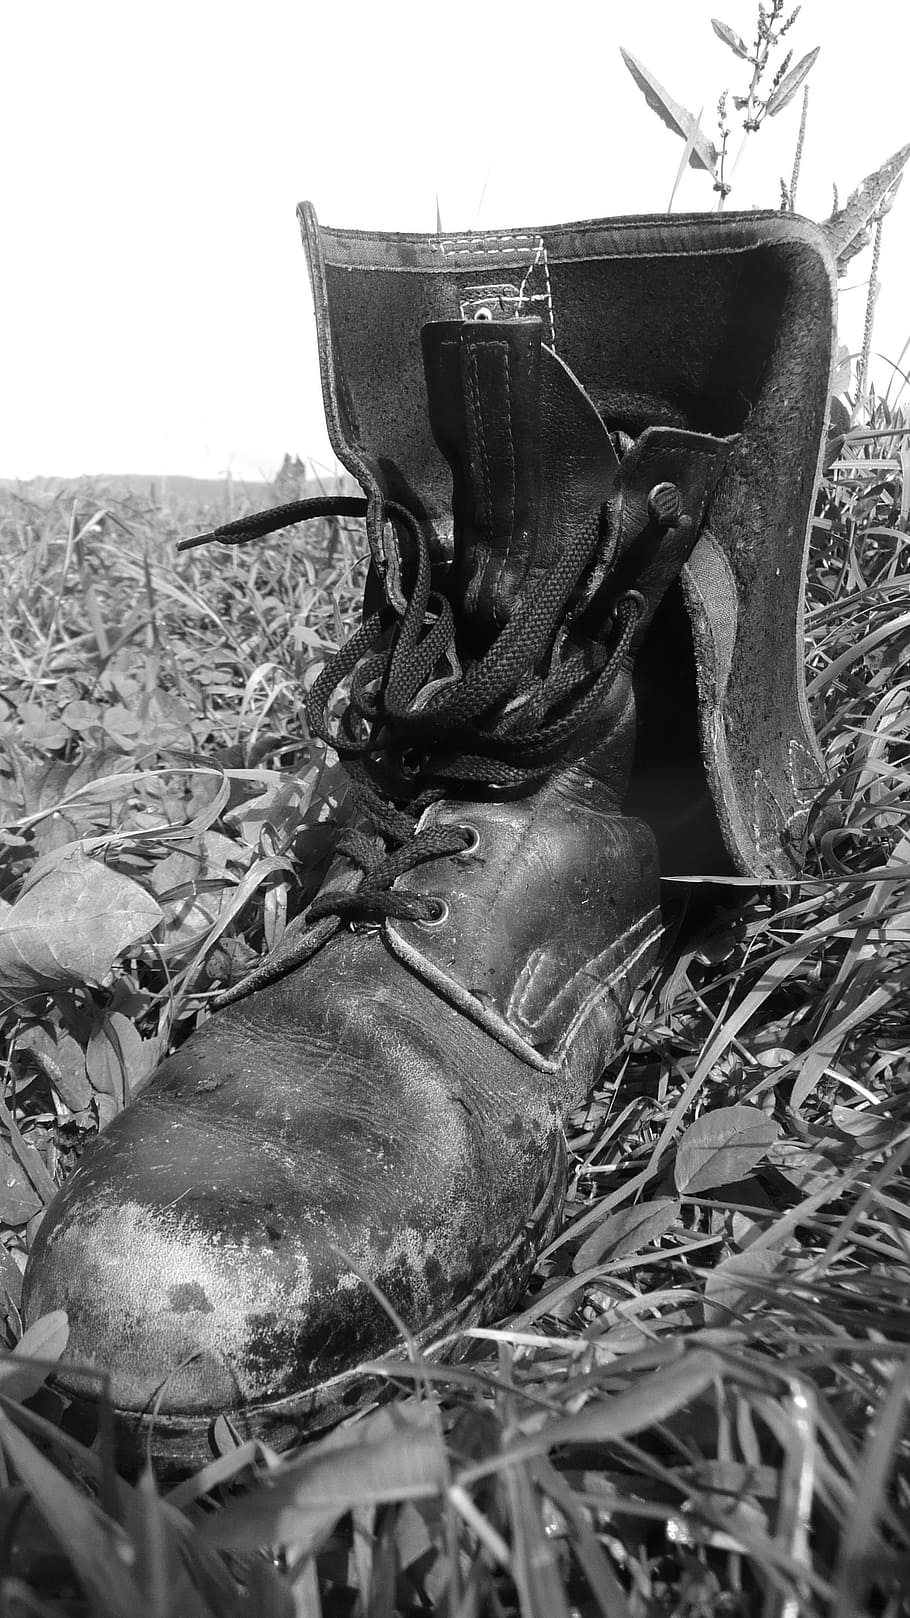 Jackboot, Army, Military, Battered, dusty, footwear, forces, occupation, worn, combat